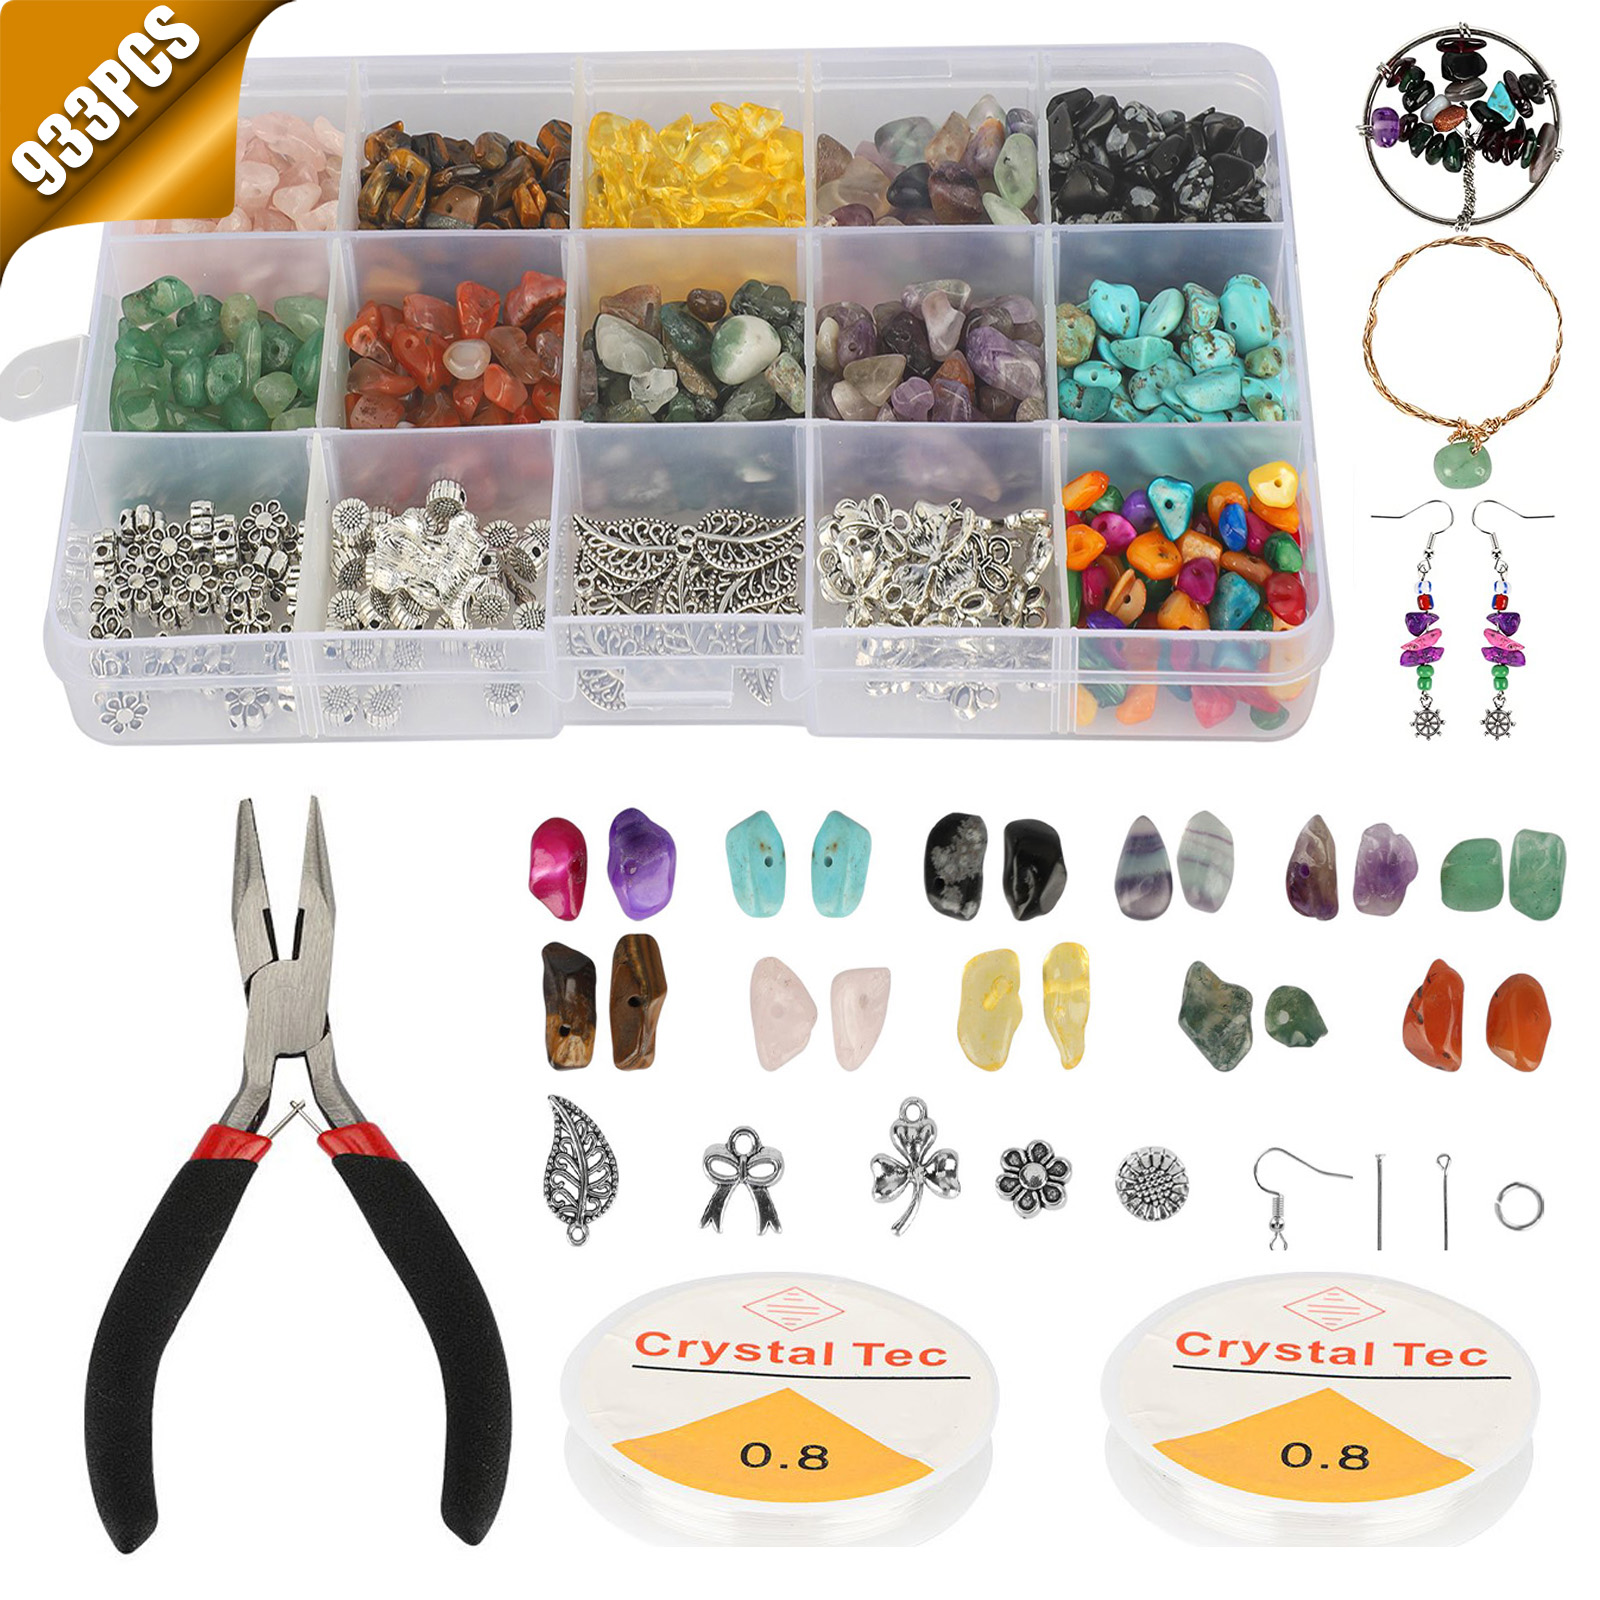 TSV 933pcs Natural Beads for Jewelry Making Kit, Irregular Chips Stone Gemstone Beads Kit with Earring Hooks Spacer Beads Pendants Charms Jump Rings for DIY Necklace Bracelet Earring Making - image 1 of 9